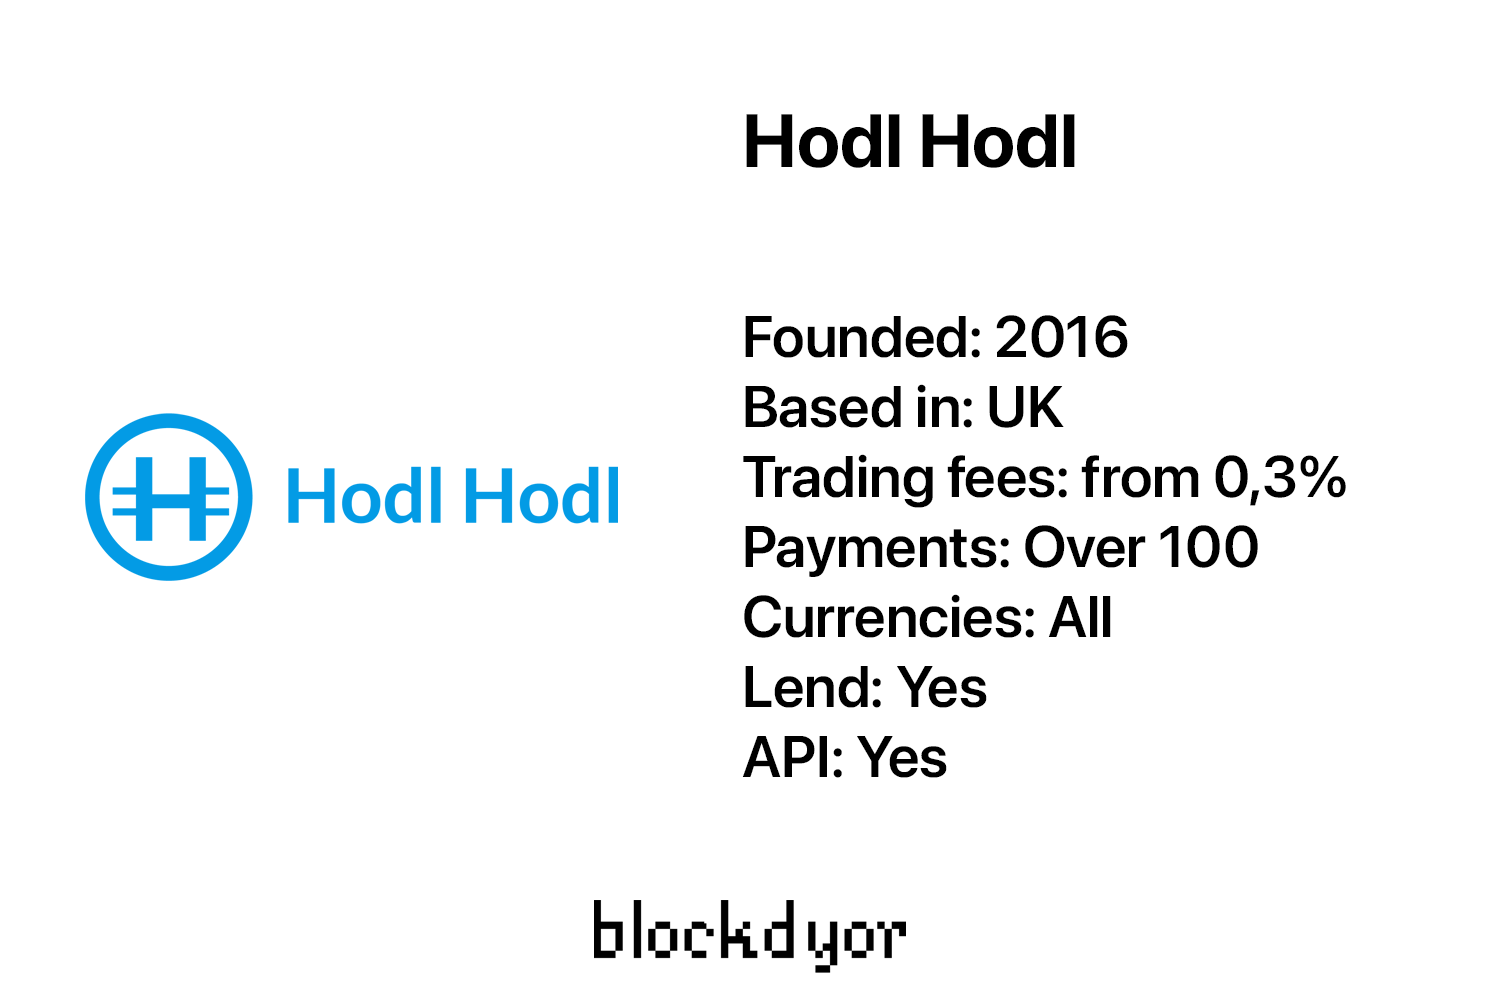 Hodl Hodl Overview